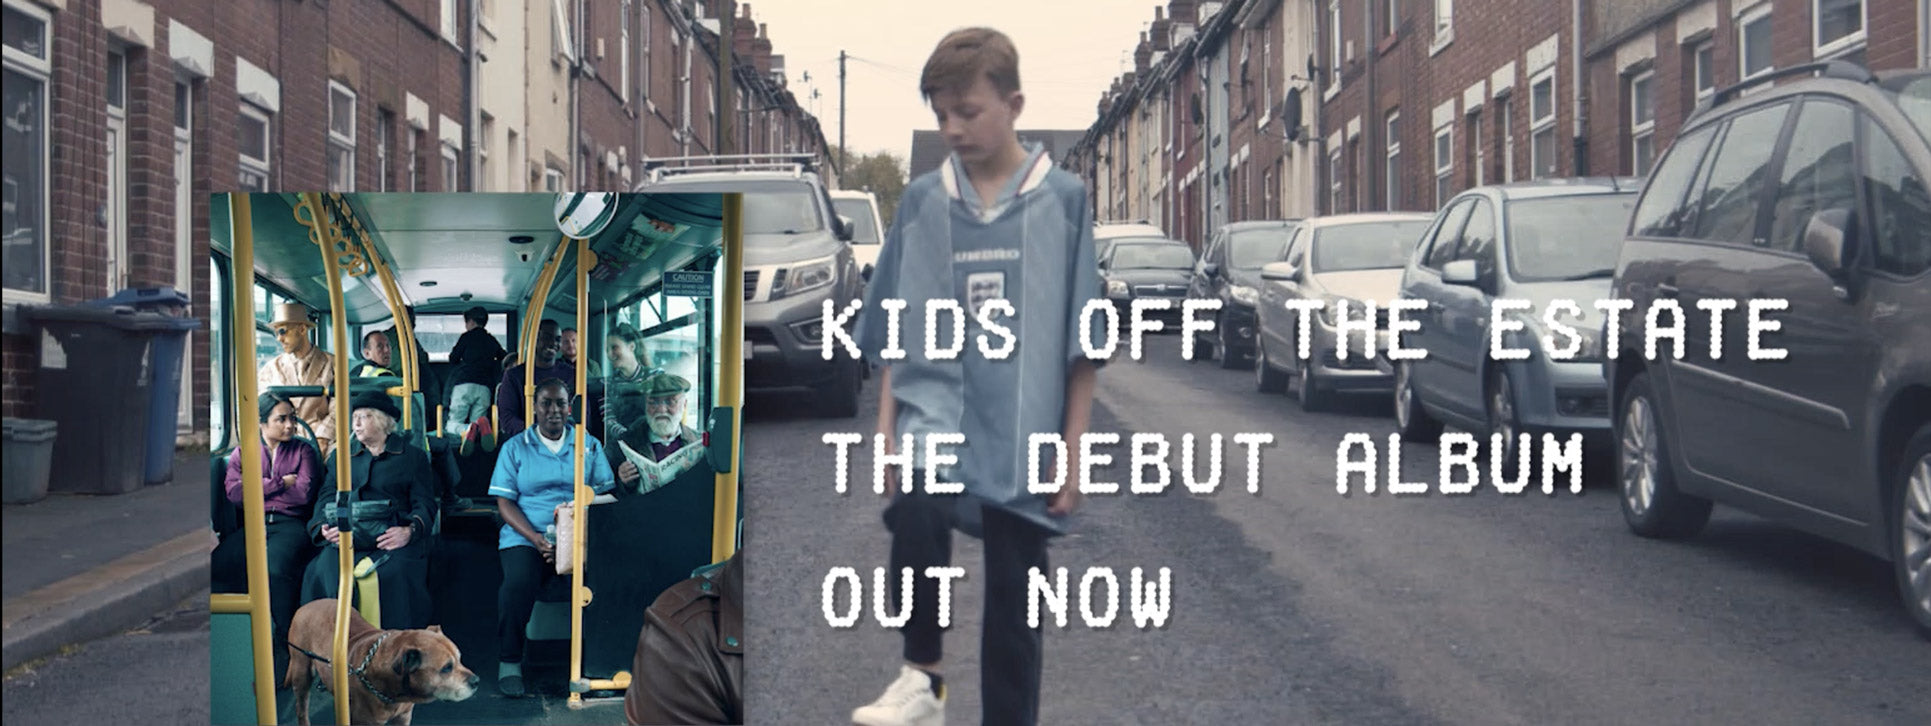 Load video: The Reytons - Kids Off The Estate (Music Video)